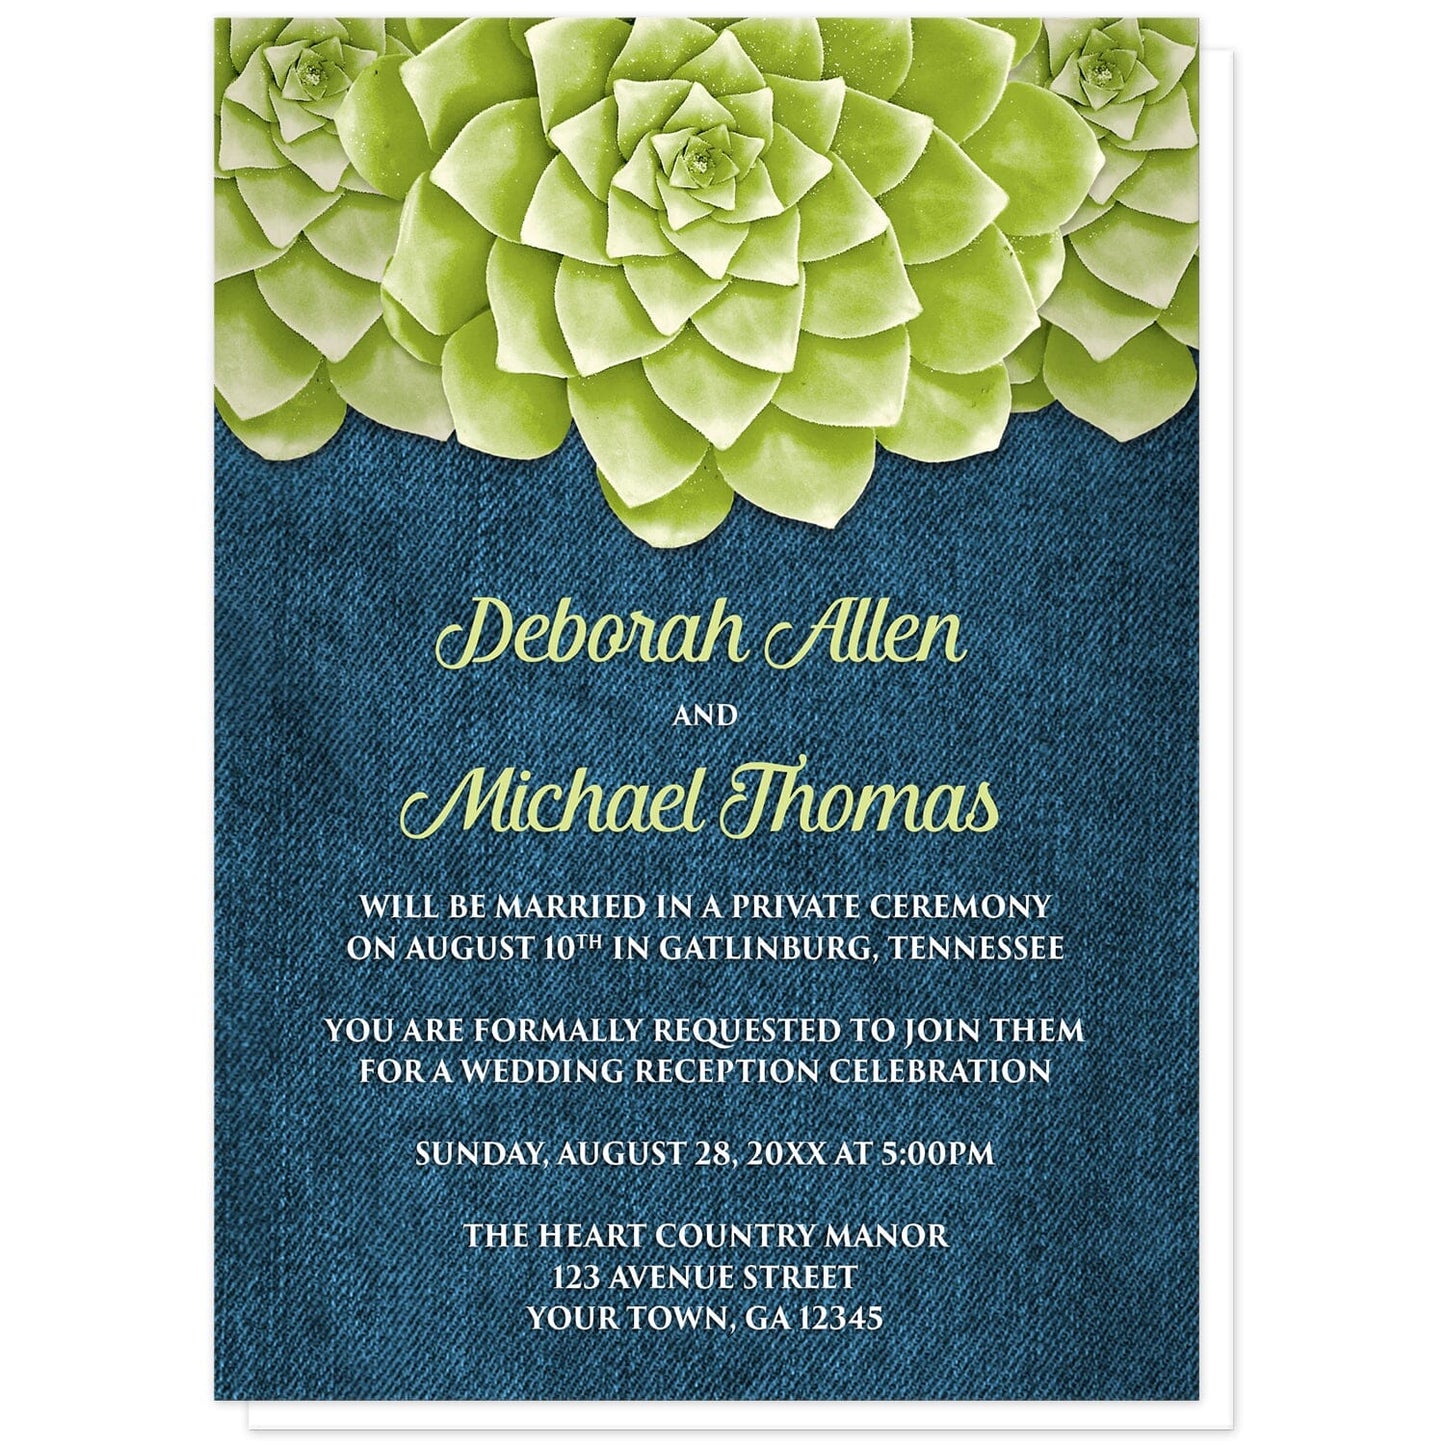 Succulent Green Blue Denim Reception Only Invitations at Artistically Invited. Cool and fresh succulent green blue denim reception only invitations with three large green succulents along the top of the invitations over a rustic blue denim background design. Your personalized post-wedding reception details are custom printed in green and light green over the denim background below the succulents. 